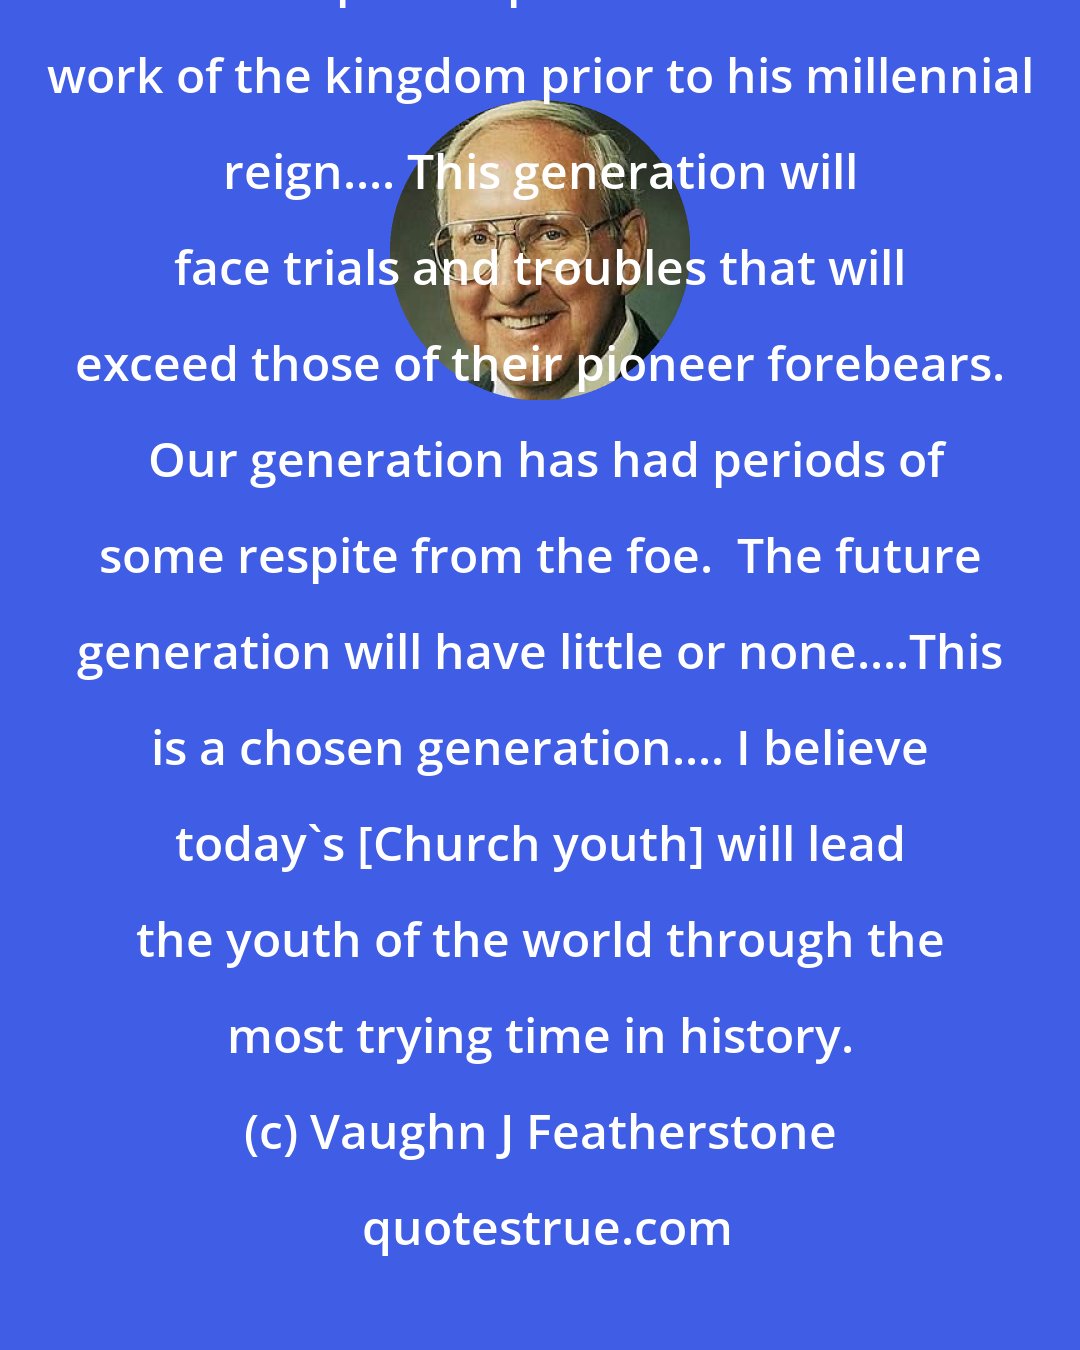 Vaughn J Featherstone: It is not difficult to understand why the great God of heaven has reserved these special spirits for the final work of the kingdom prior to his millennial reign.... This generation will face trials and troubles that will exceed those of their pioneer forebears.  Our generation has had periods of some respite from the foe.  The future generation will have little or none....This is a chosen generation.... I believe today's [Church youth] will lead the youth of the world through the most trying time in history.